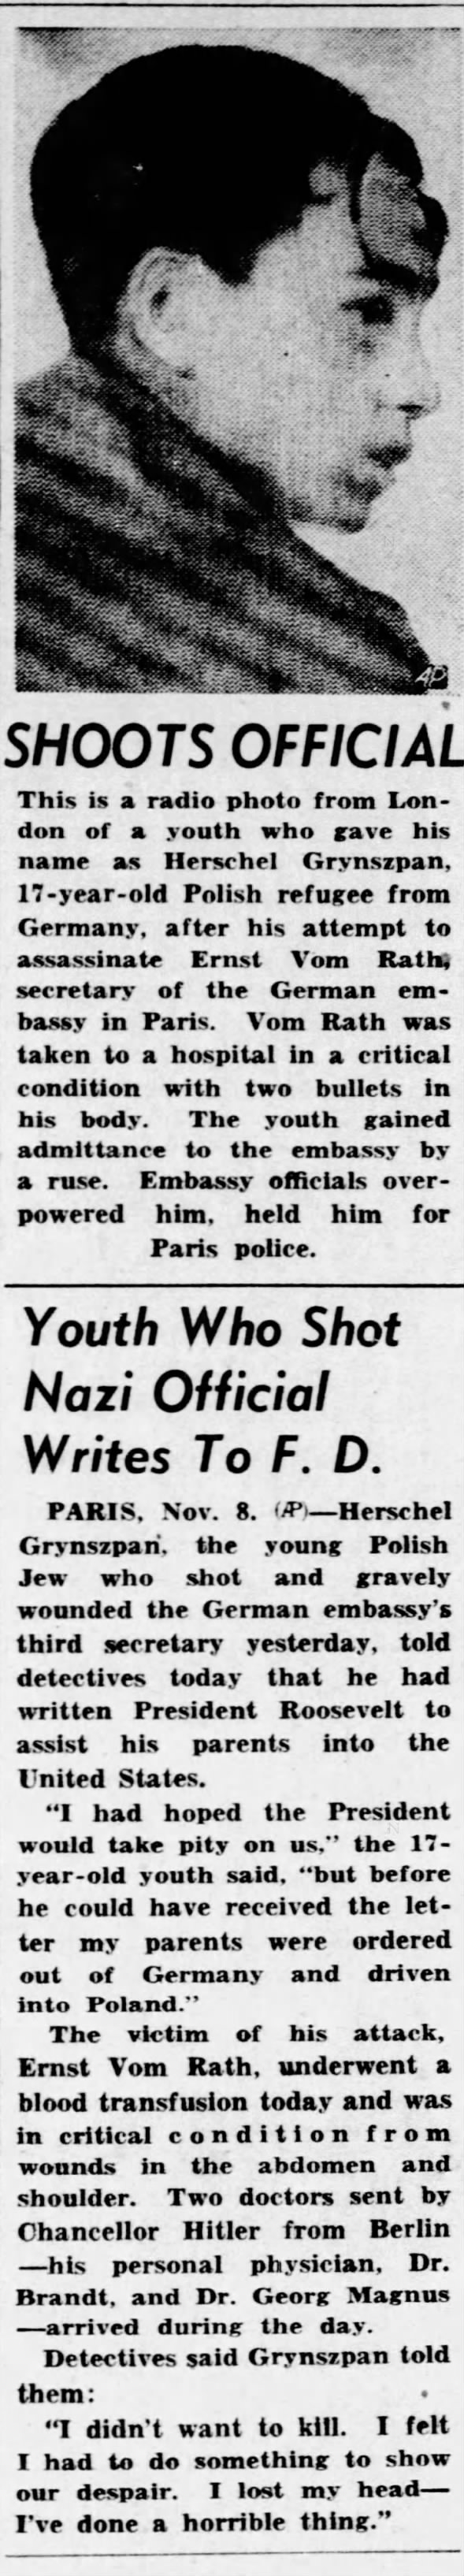 Youth Who Shot Nazi Official Writes to F.D.